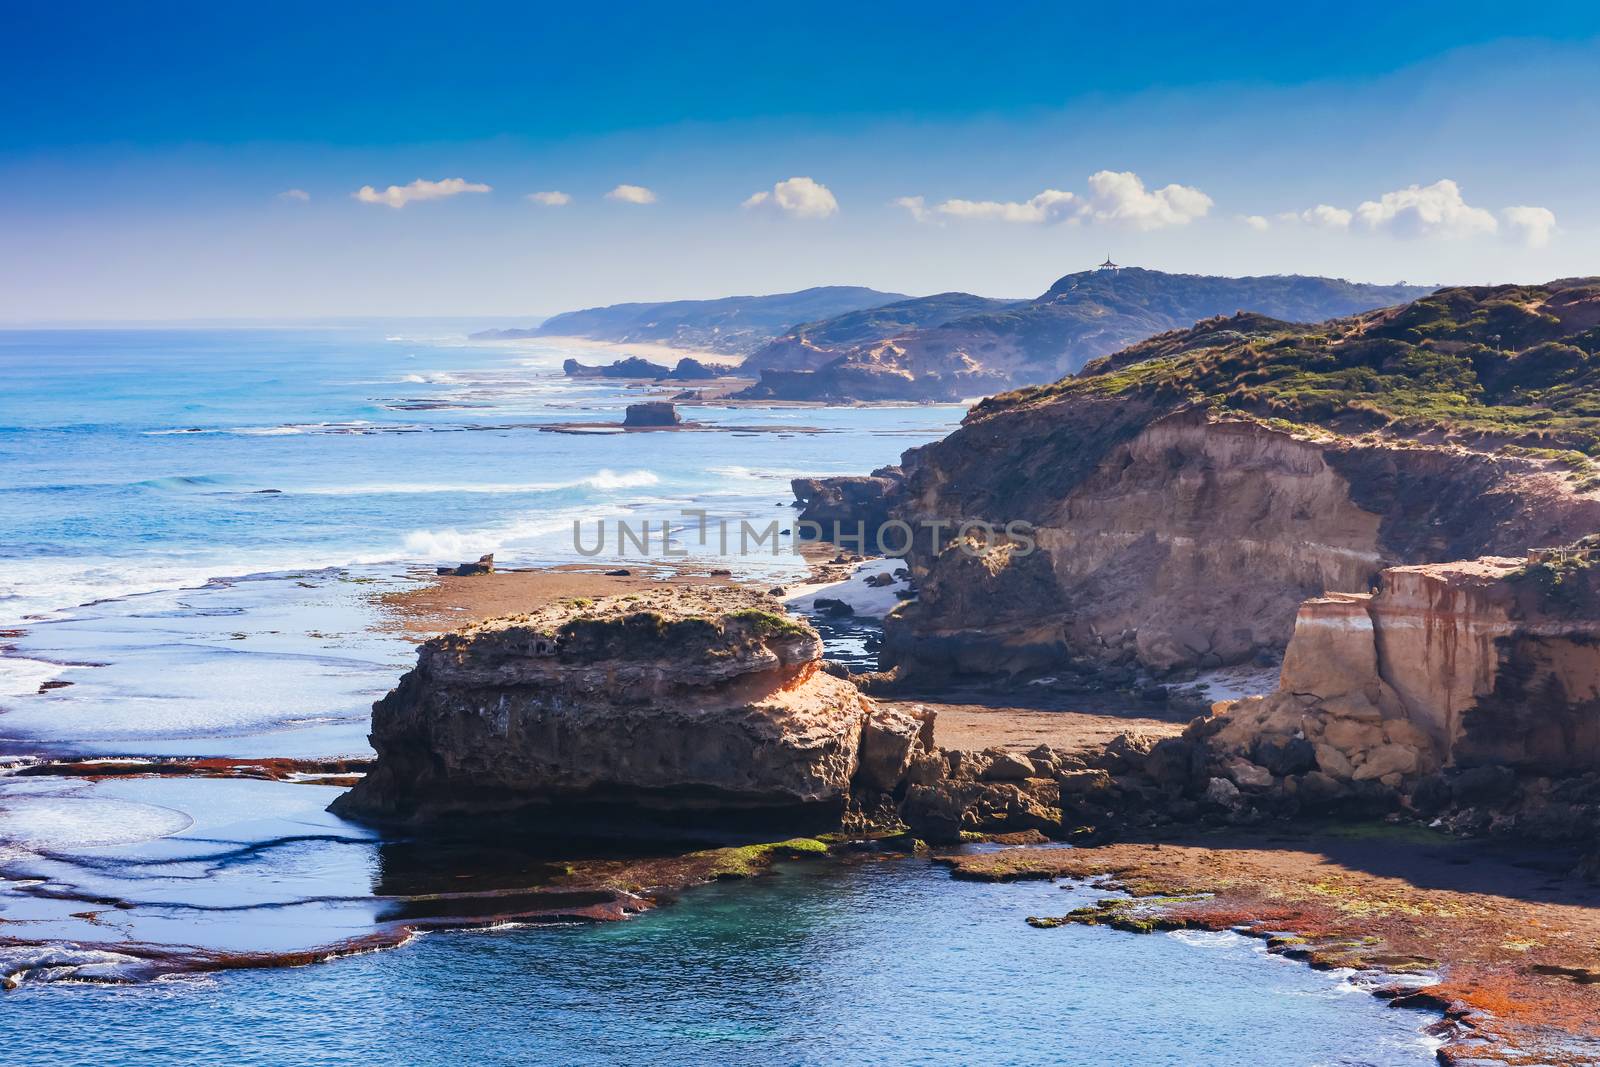 View of Mornington Peninsula coastline around DIamond Bay and Bay of Islands from Jubilee Point on a cool winter's day in Sorrento, Victoria, Australia